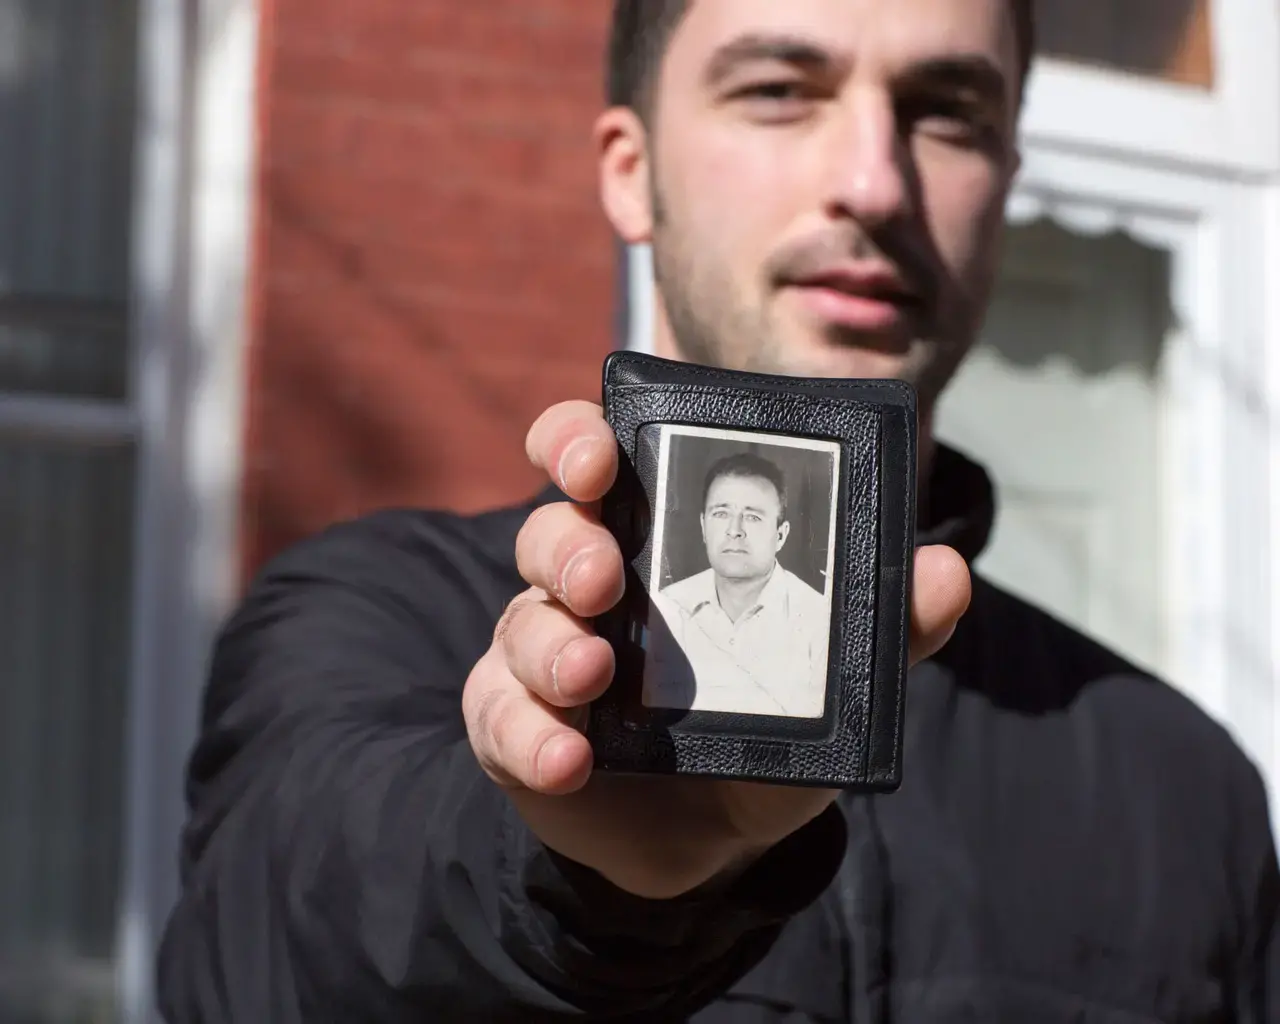 Hakan Ibisi carries a photograph of his grandfather in his wallet. Ibisi was photographed for the Philly Block Project, a collaboration between the Philadelphia Photo Arts Center and Hank Willis Thomas. Photo by Wyatt Gallery/Hank Willis Thomas Studio, 2015.